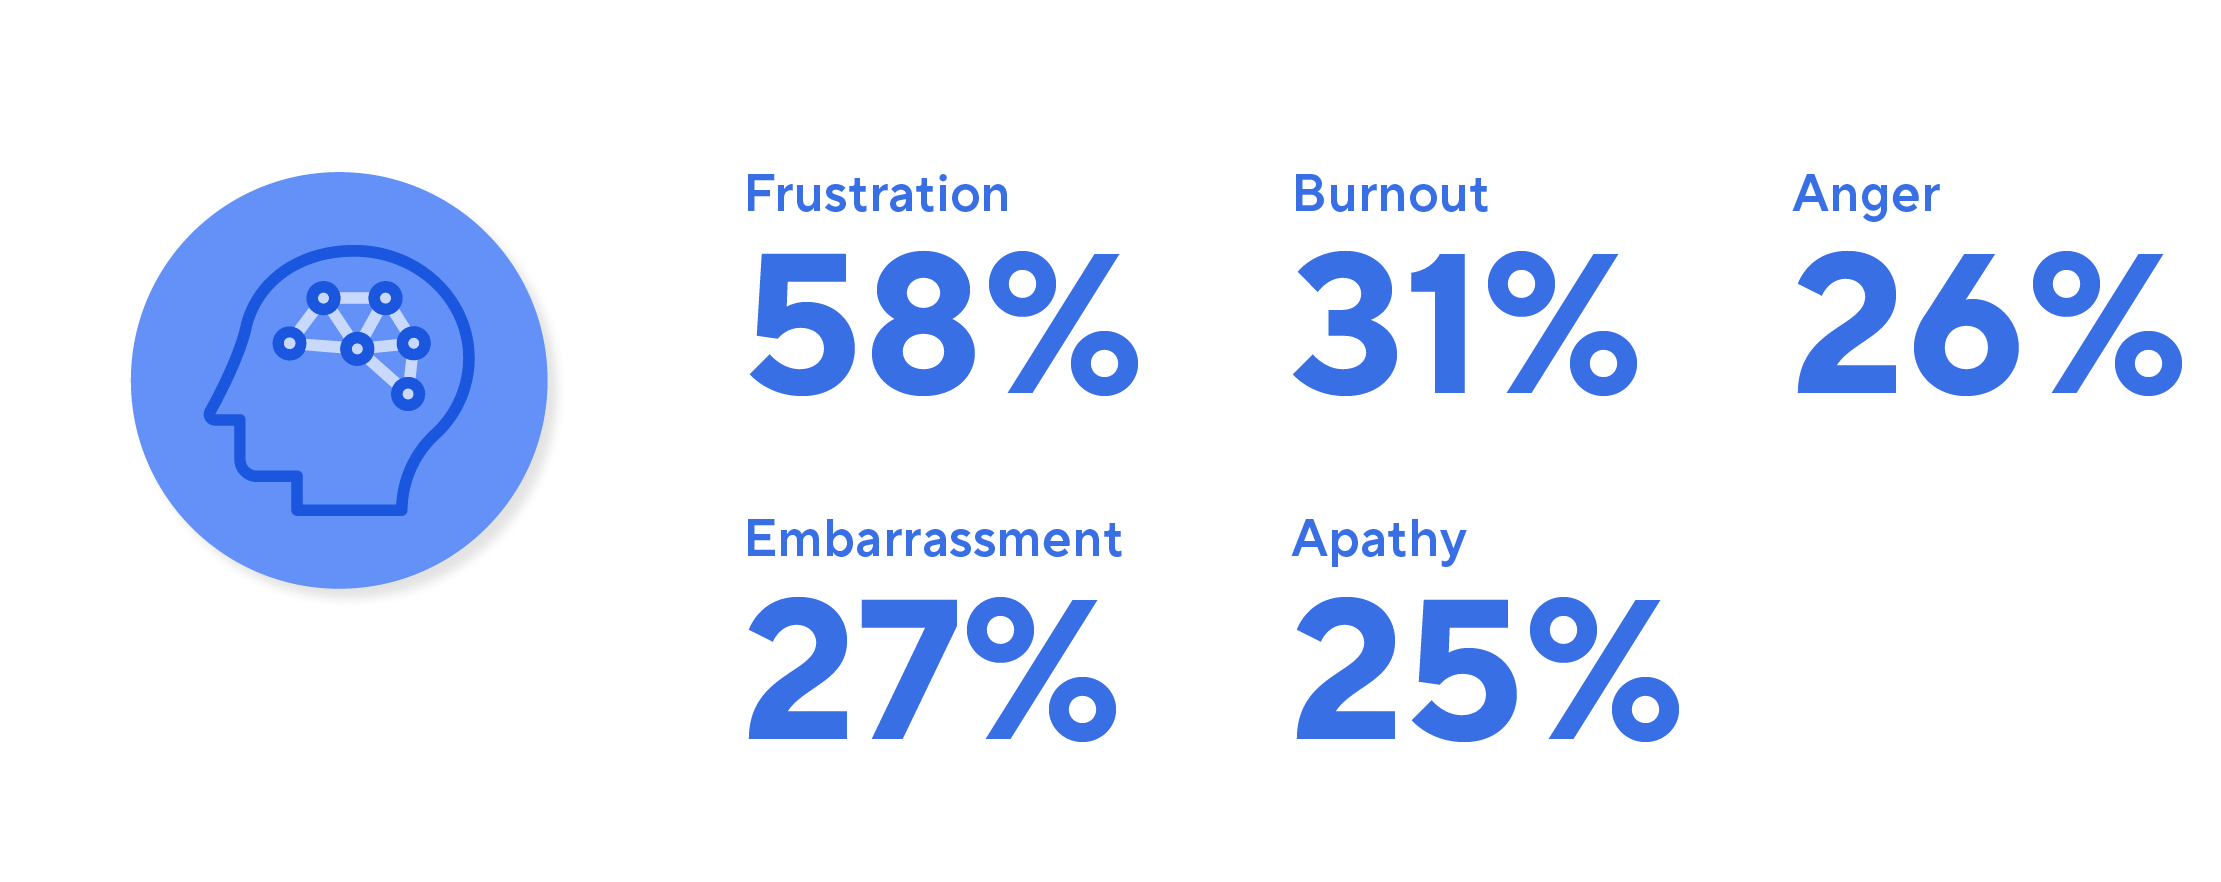 Infographic - Frustration 58%, Burnout 31%, Anger 26%, Embarrassment 27%, Apathy 25%